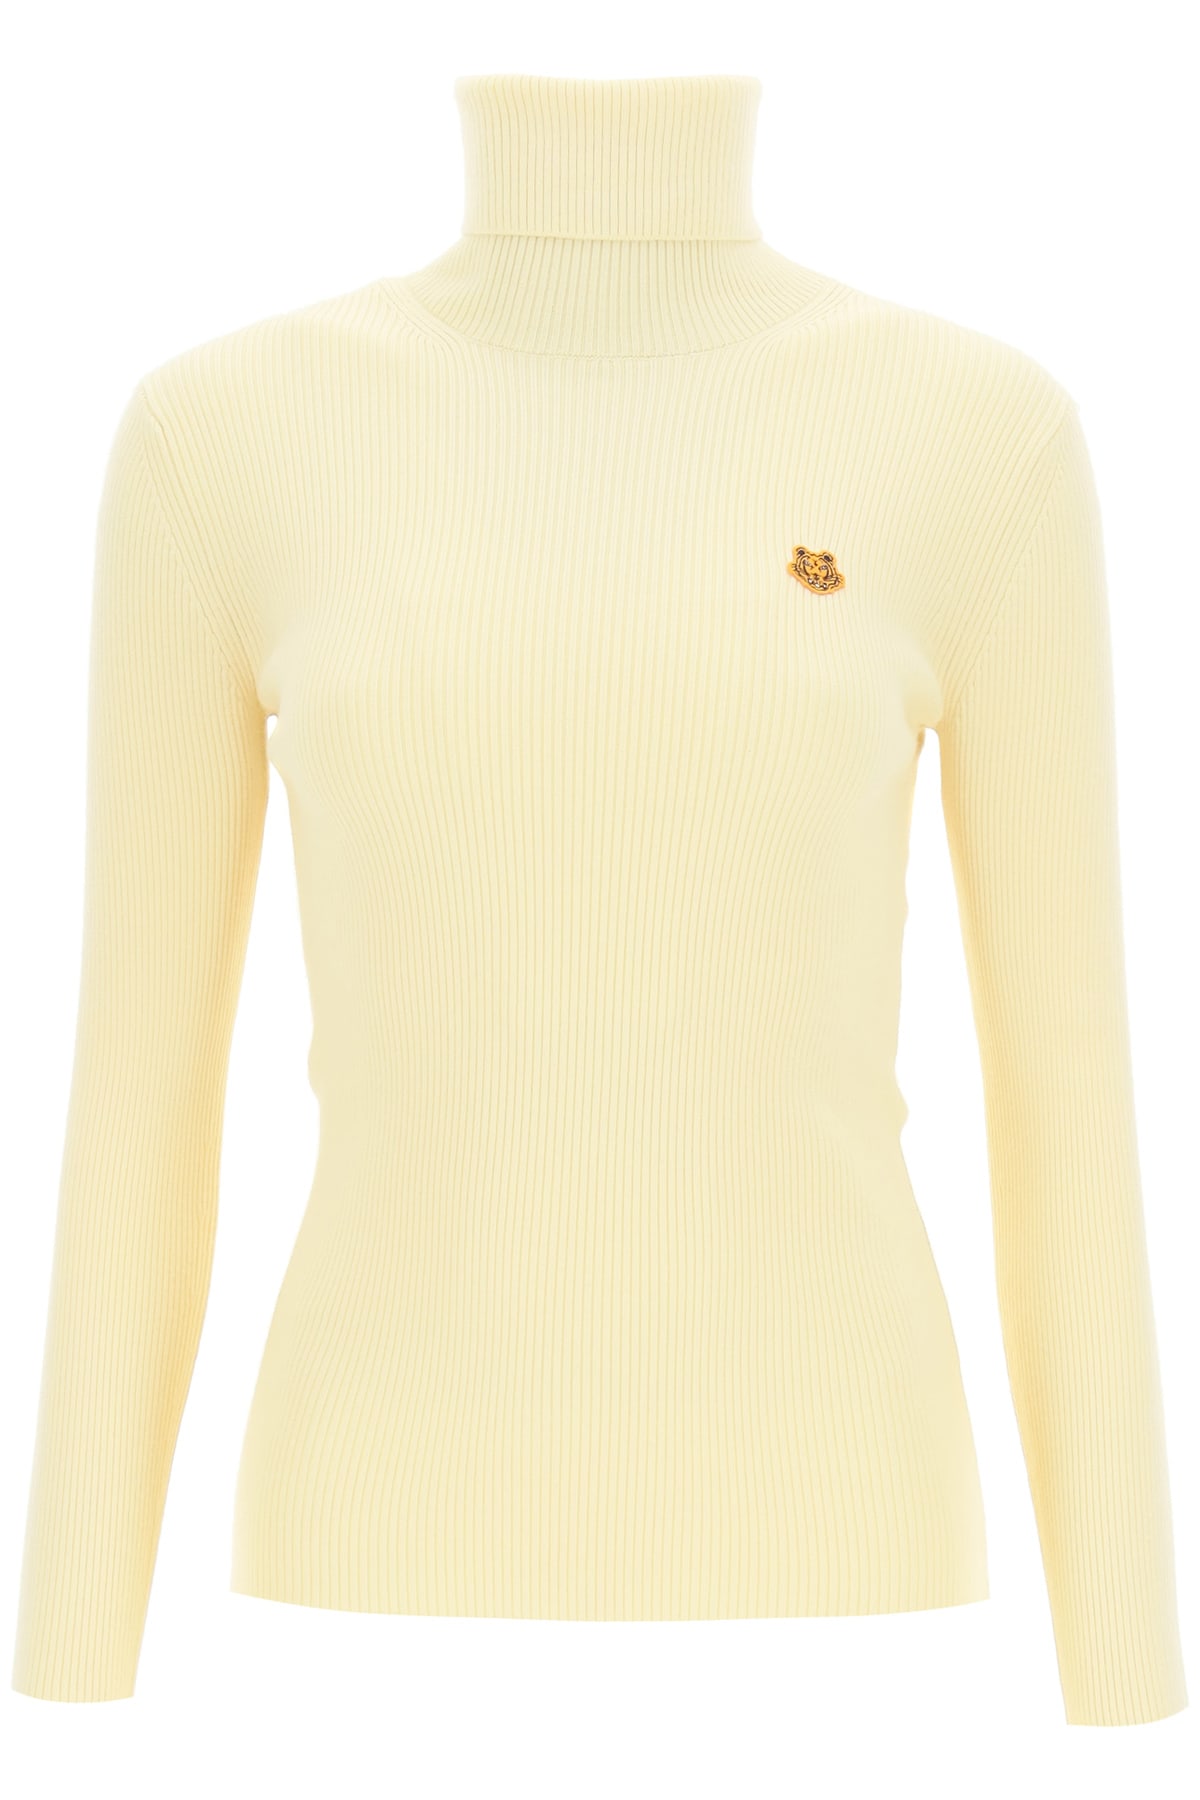 Kenzo Turtleneck Sweater With Tiger Crest Patch